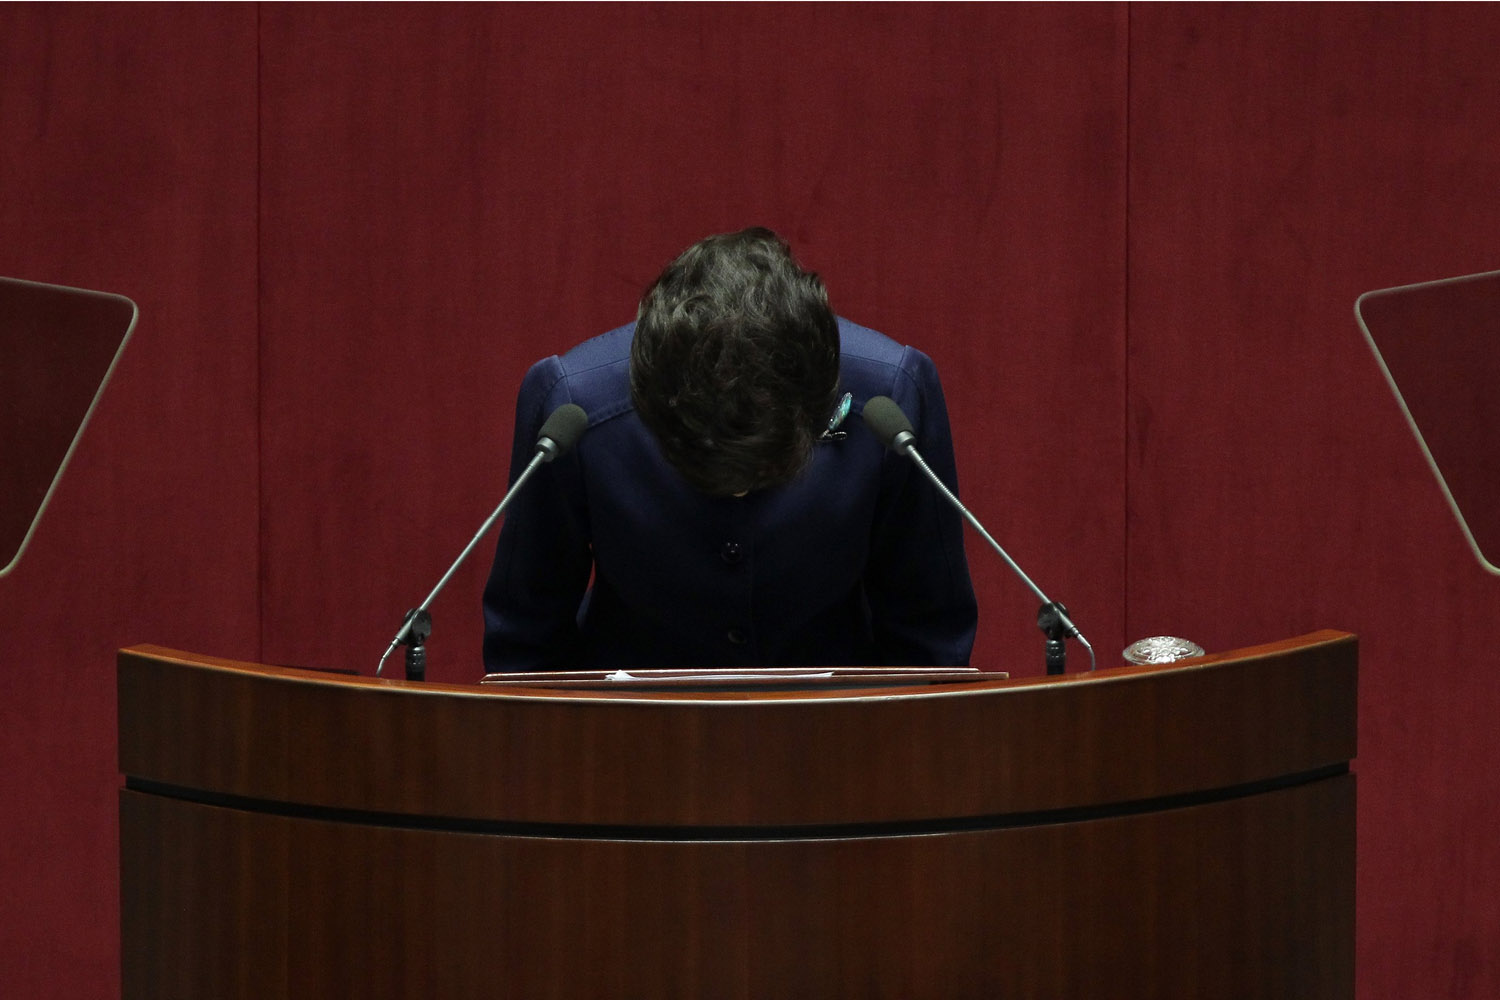 November 18, 2013. South Korean President Park Geun-Hye bows her head as speaks at the National Assembly in Seoul, South Korea. President Park Geun-Hye today announced that she would  respect and accept  her rival parties agreement after the allegations that state agencies attempted to tamper with last year's presidential race.